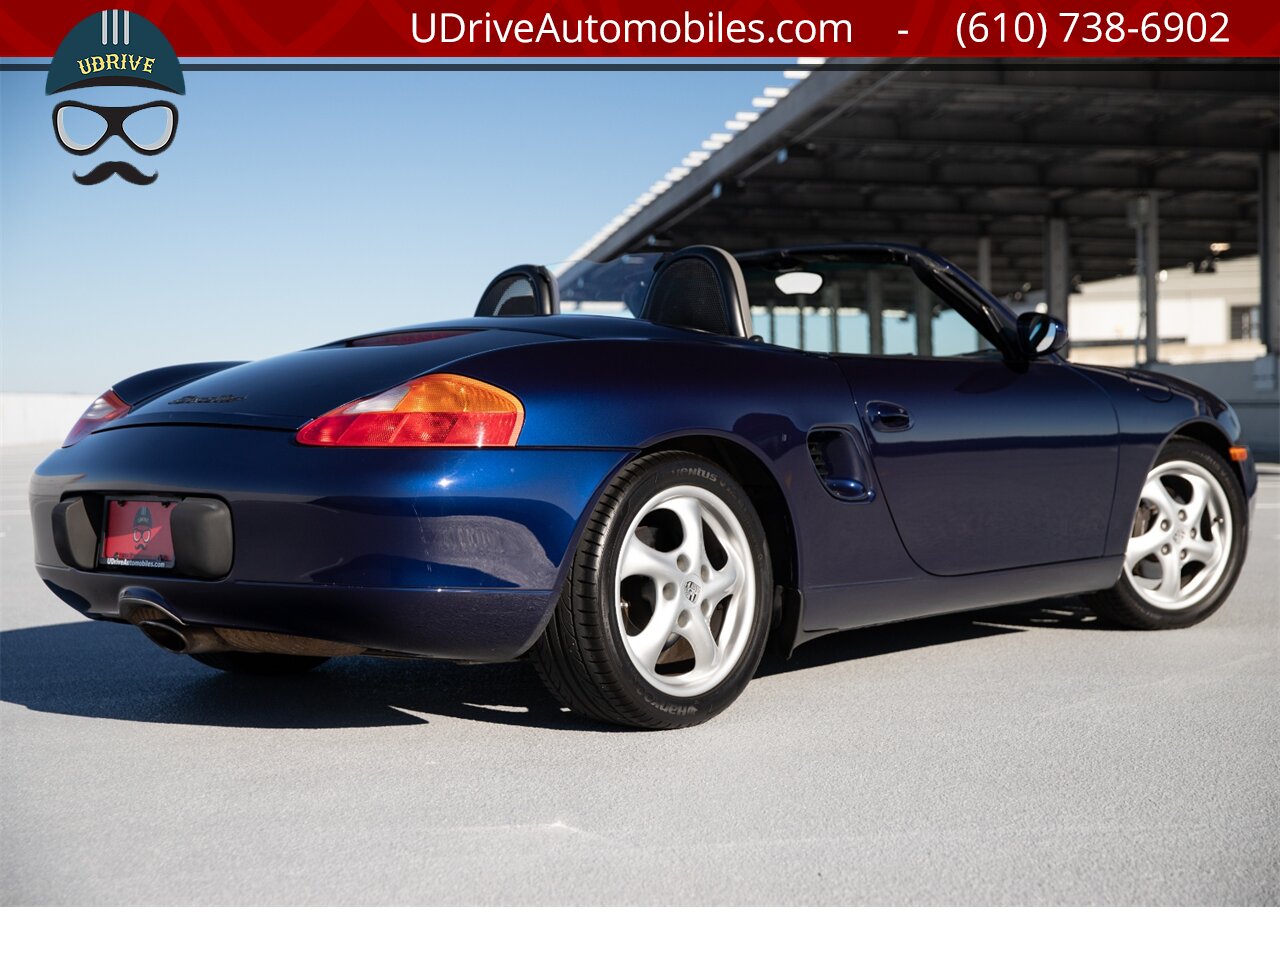 2001 Porsche Boxster 5 Speed Manual Detailed Service History  Same Owner for Last 18 Years Hard Top Included - Photo 2 - West Chester, PA 19382